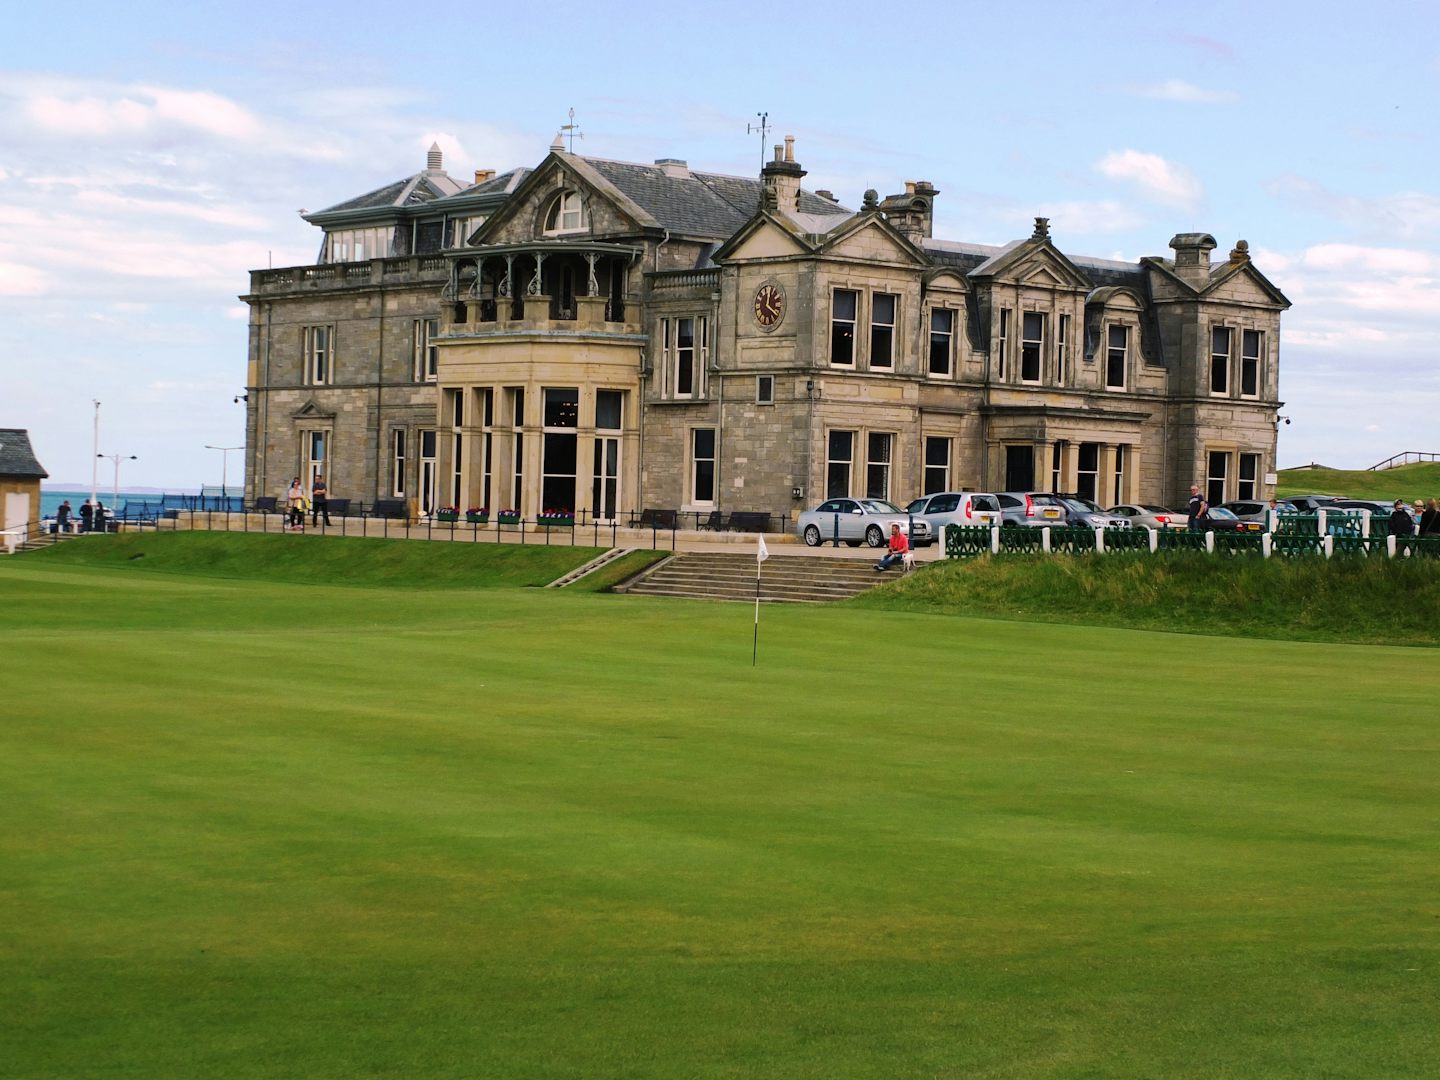 R&A at the Old Course at St. Andrews Scotland